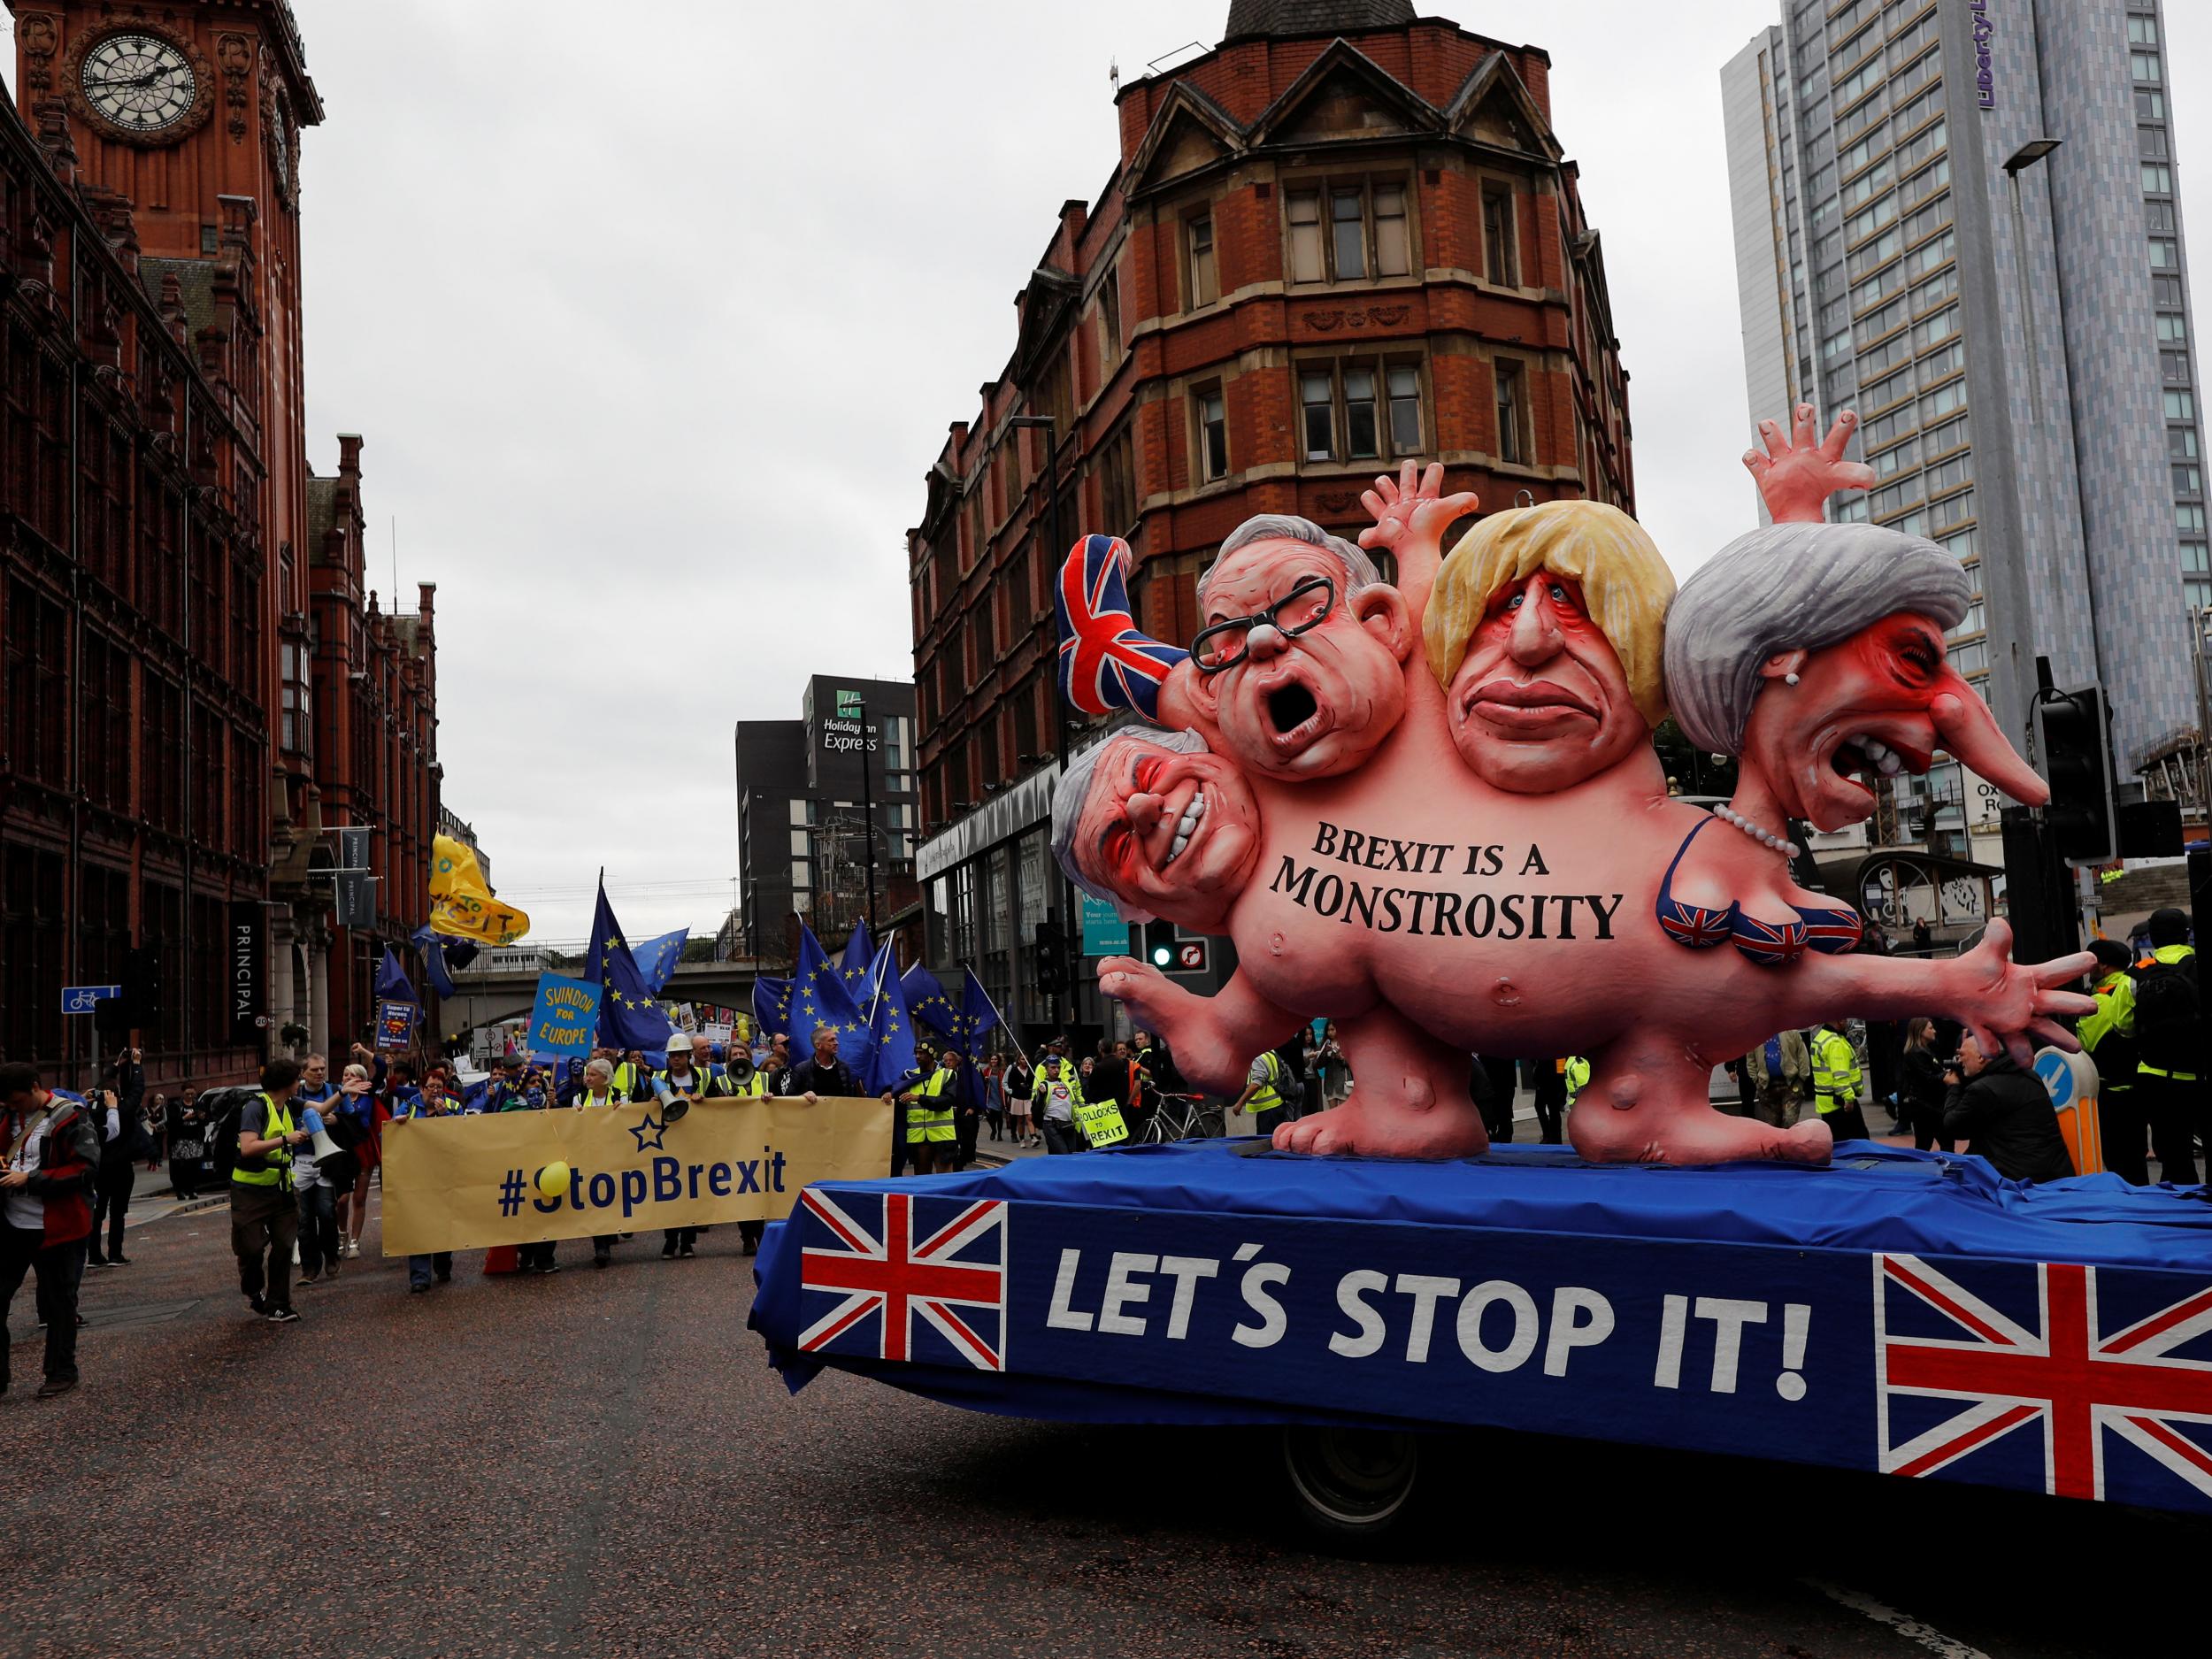 50,000 people have gathered in Manchester for anti-austerity and pro-EU demonstrations